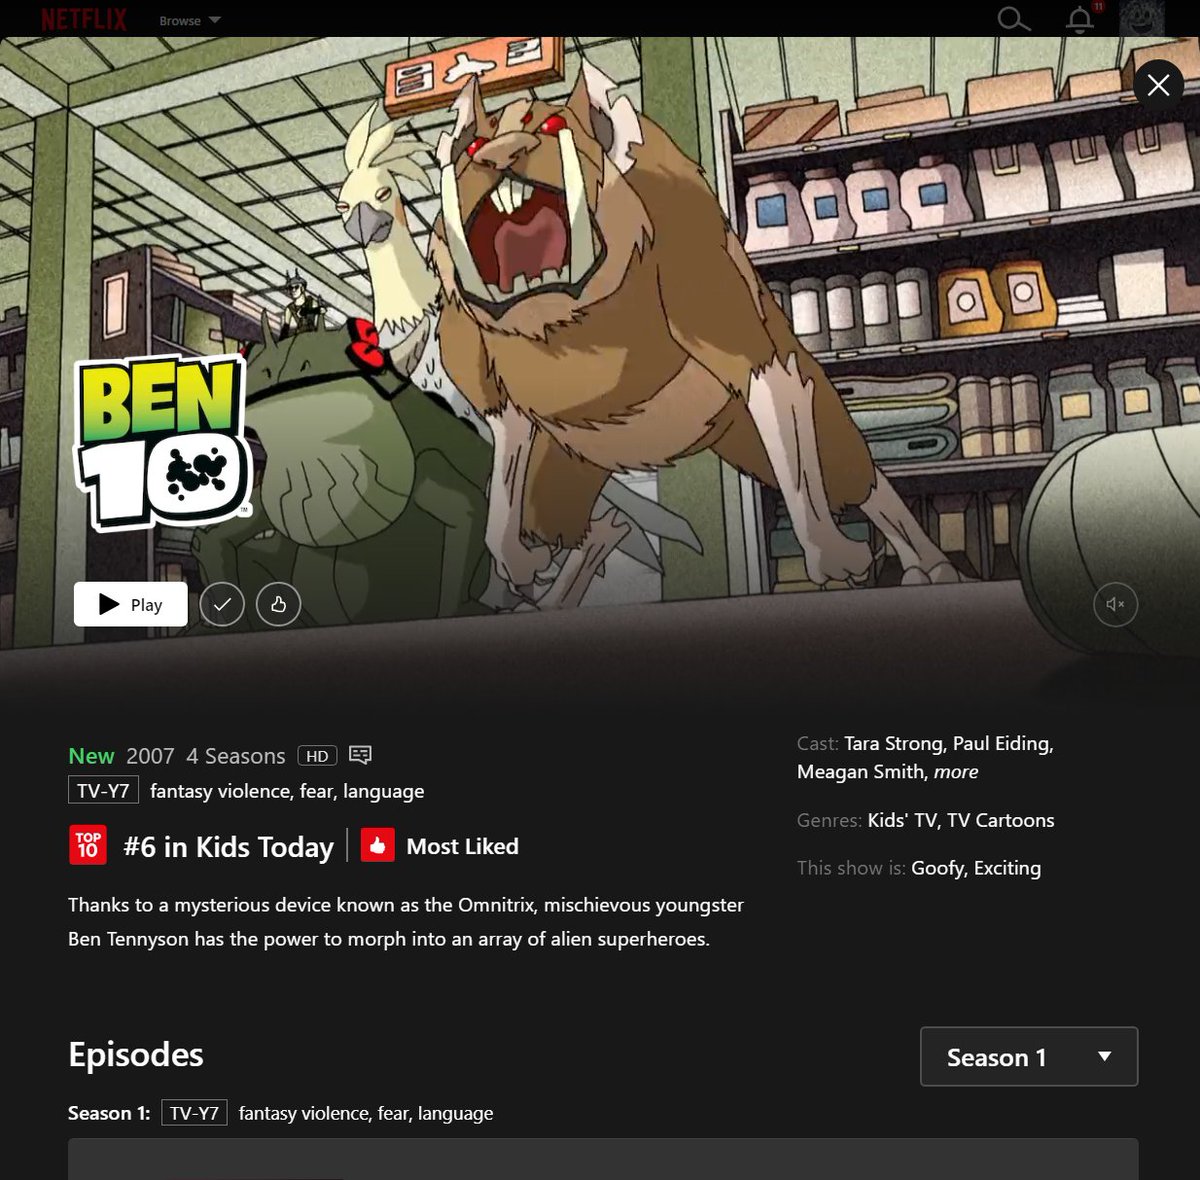 I know it's fuck Netlfix rn but HOLY SHIT THEY GOT BEN 10